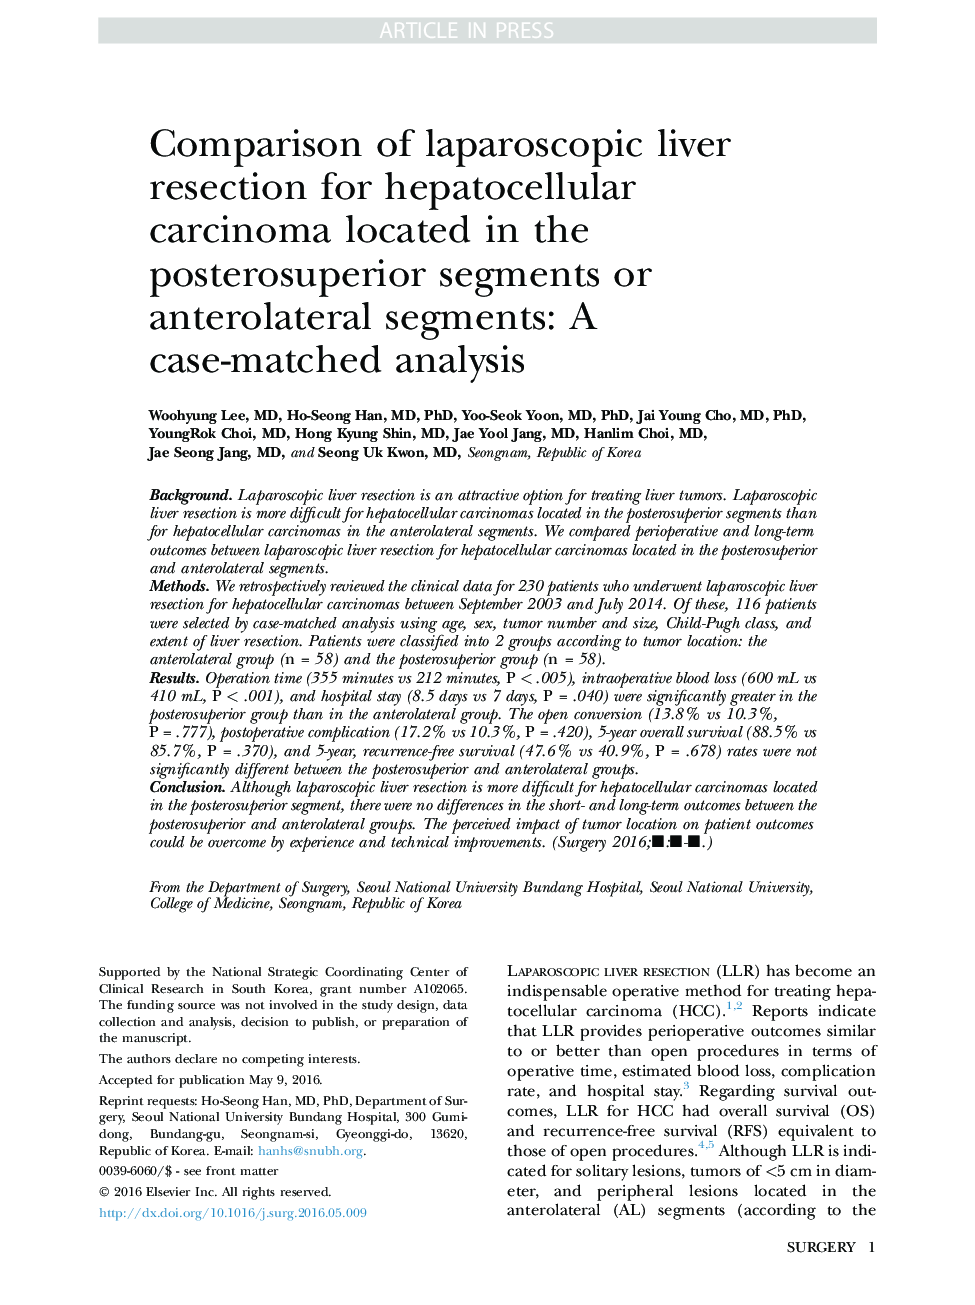 Comparison of laparoscopic liver resection for hepatocellular carcinoma located in the posterosuperior segments or anterolateral segments: A case-matched analysis